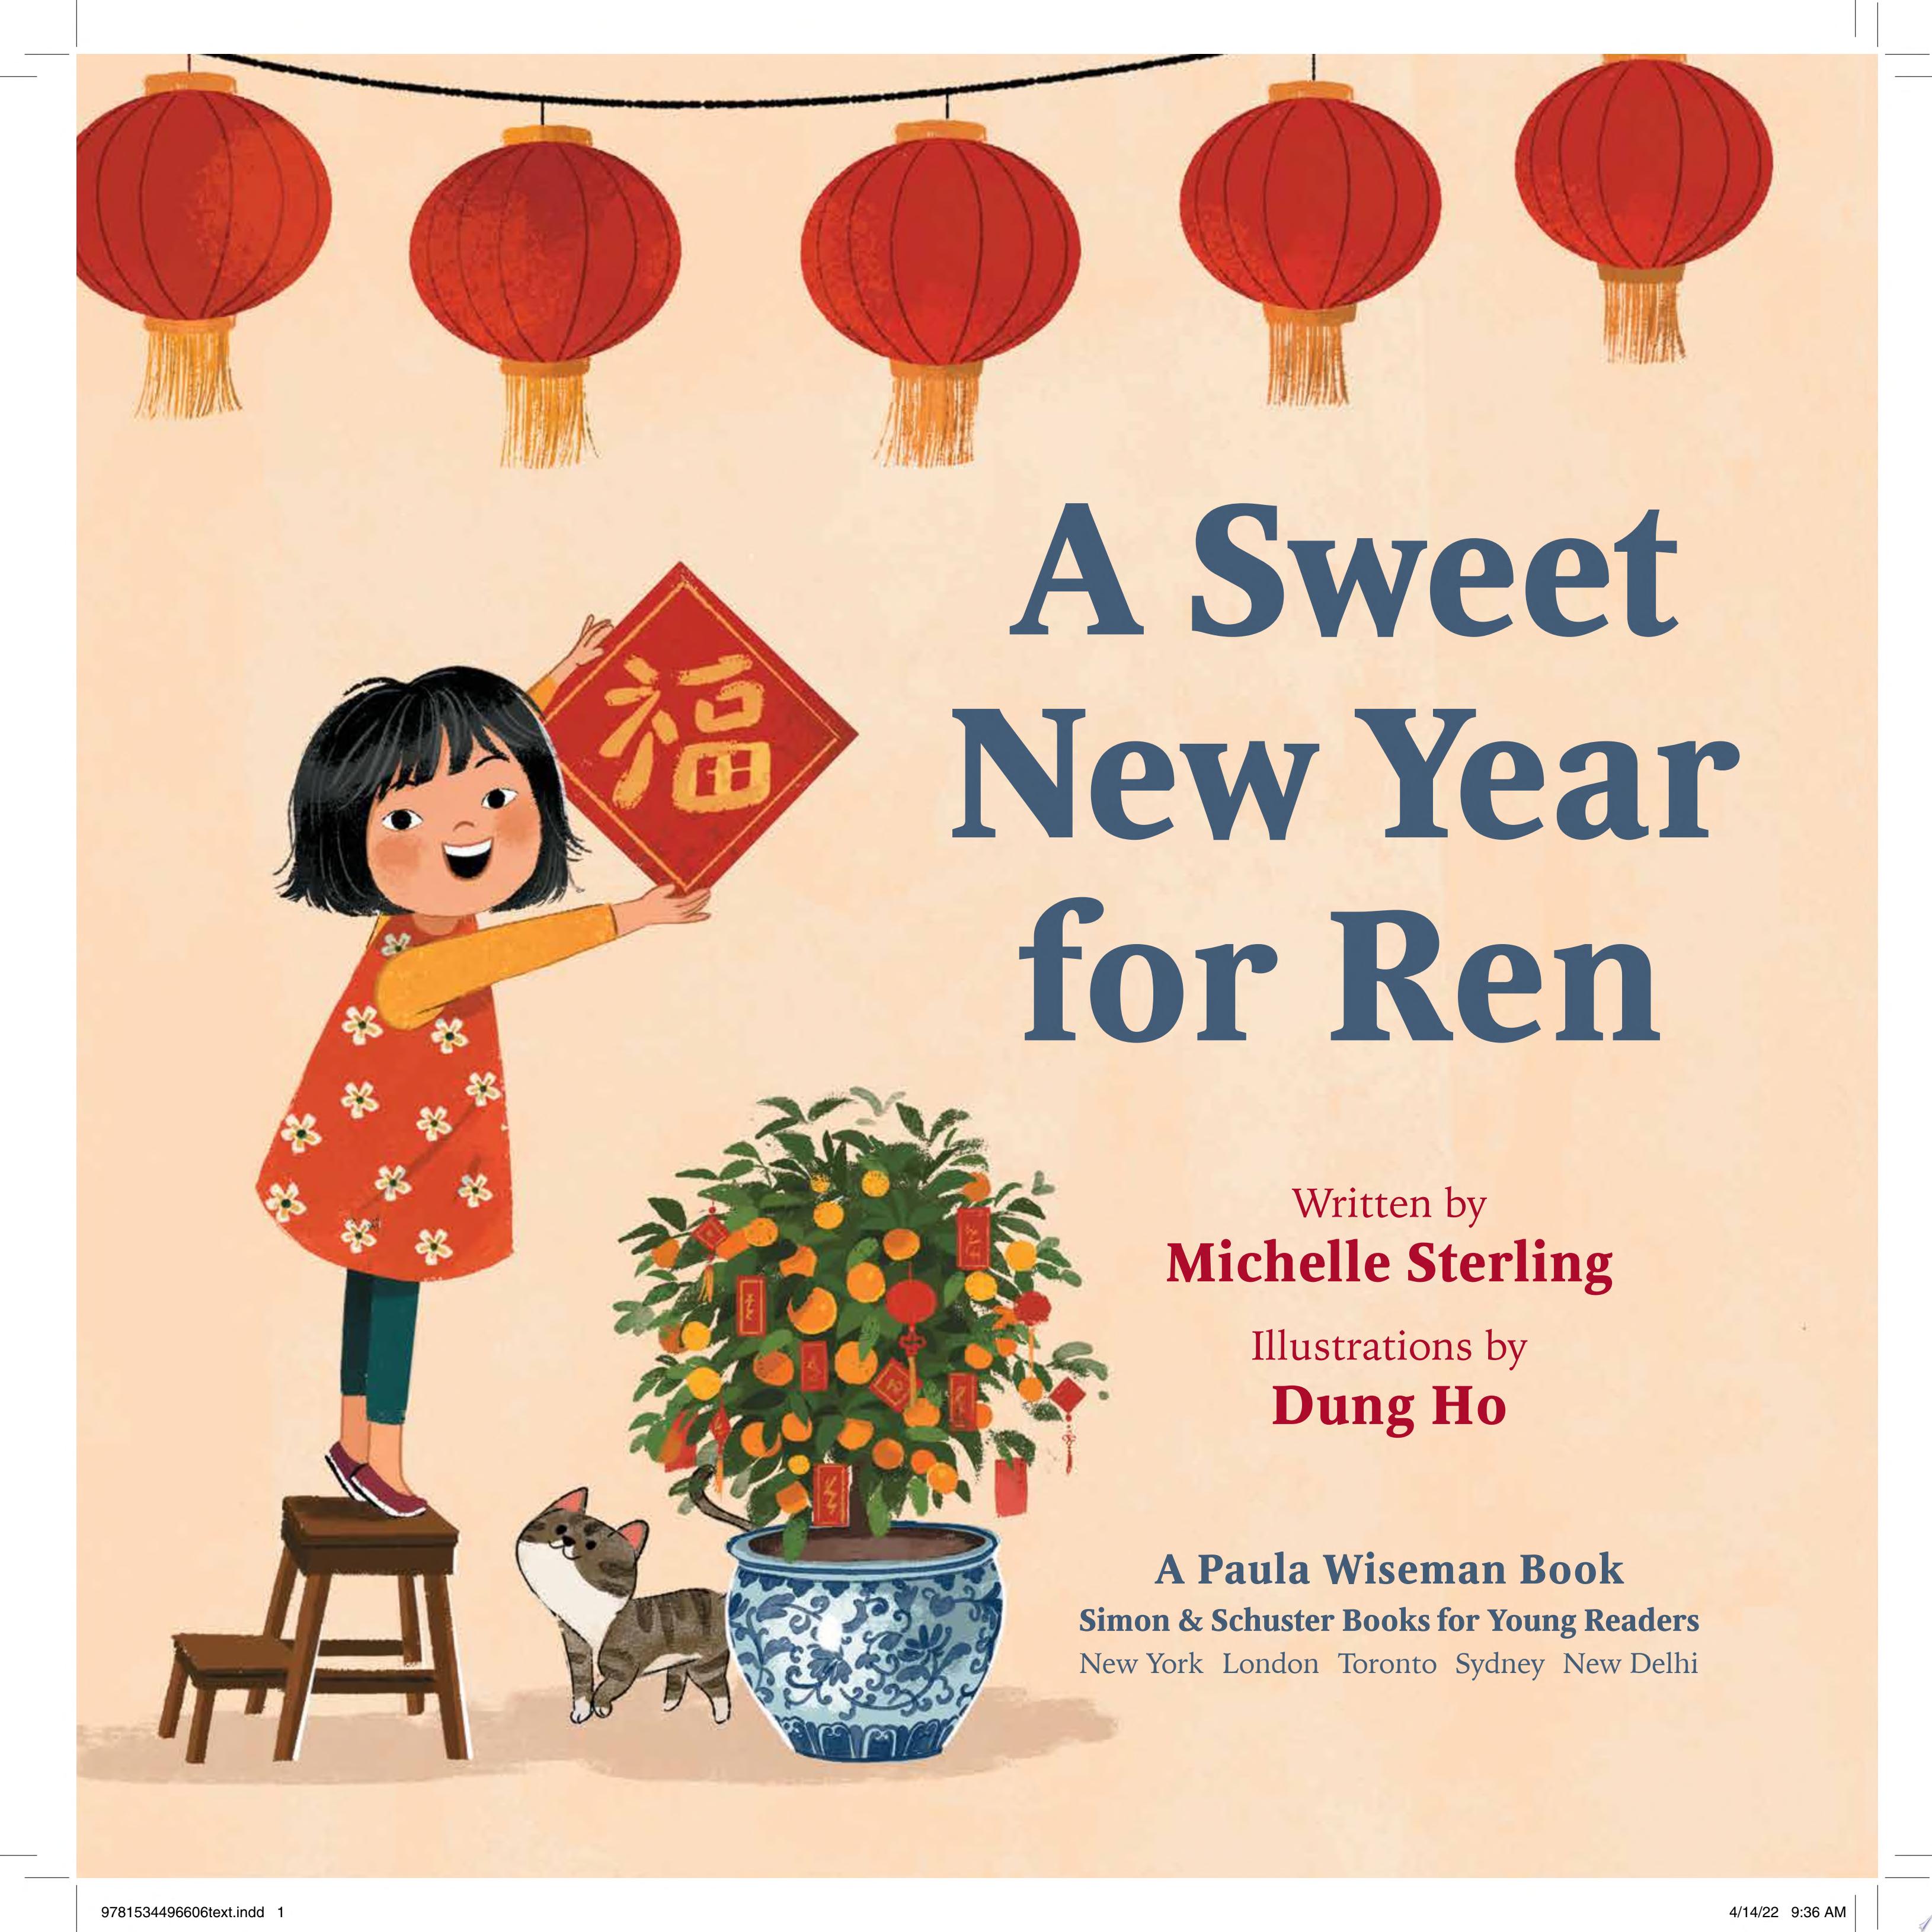 Image for "A Sweet New Year for Ren"